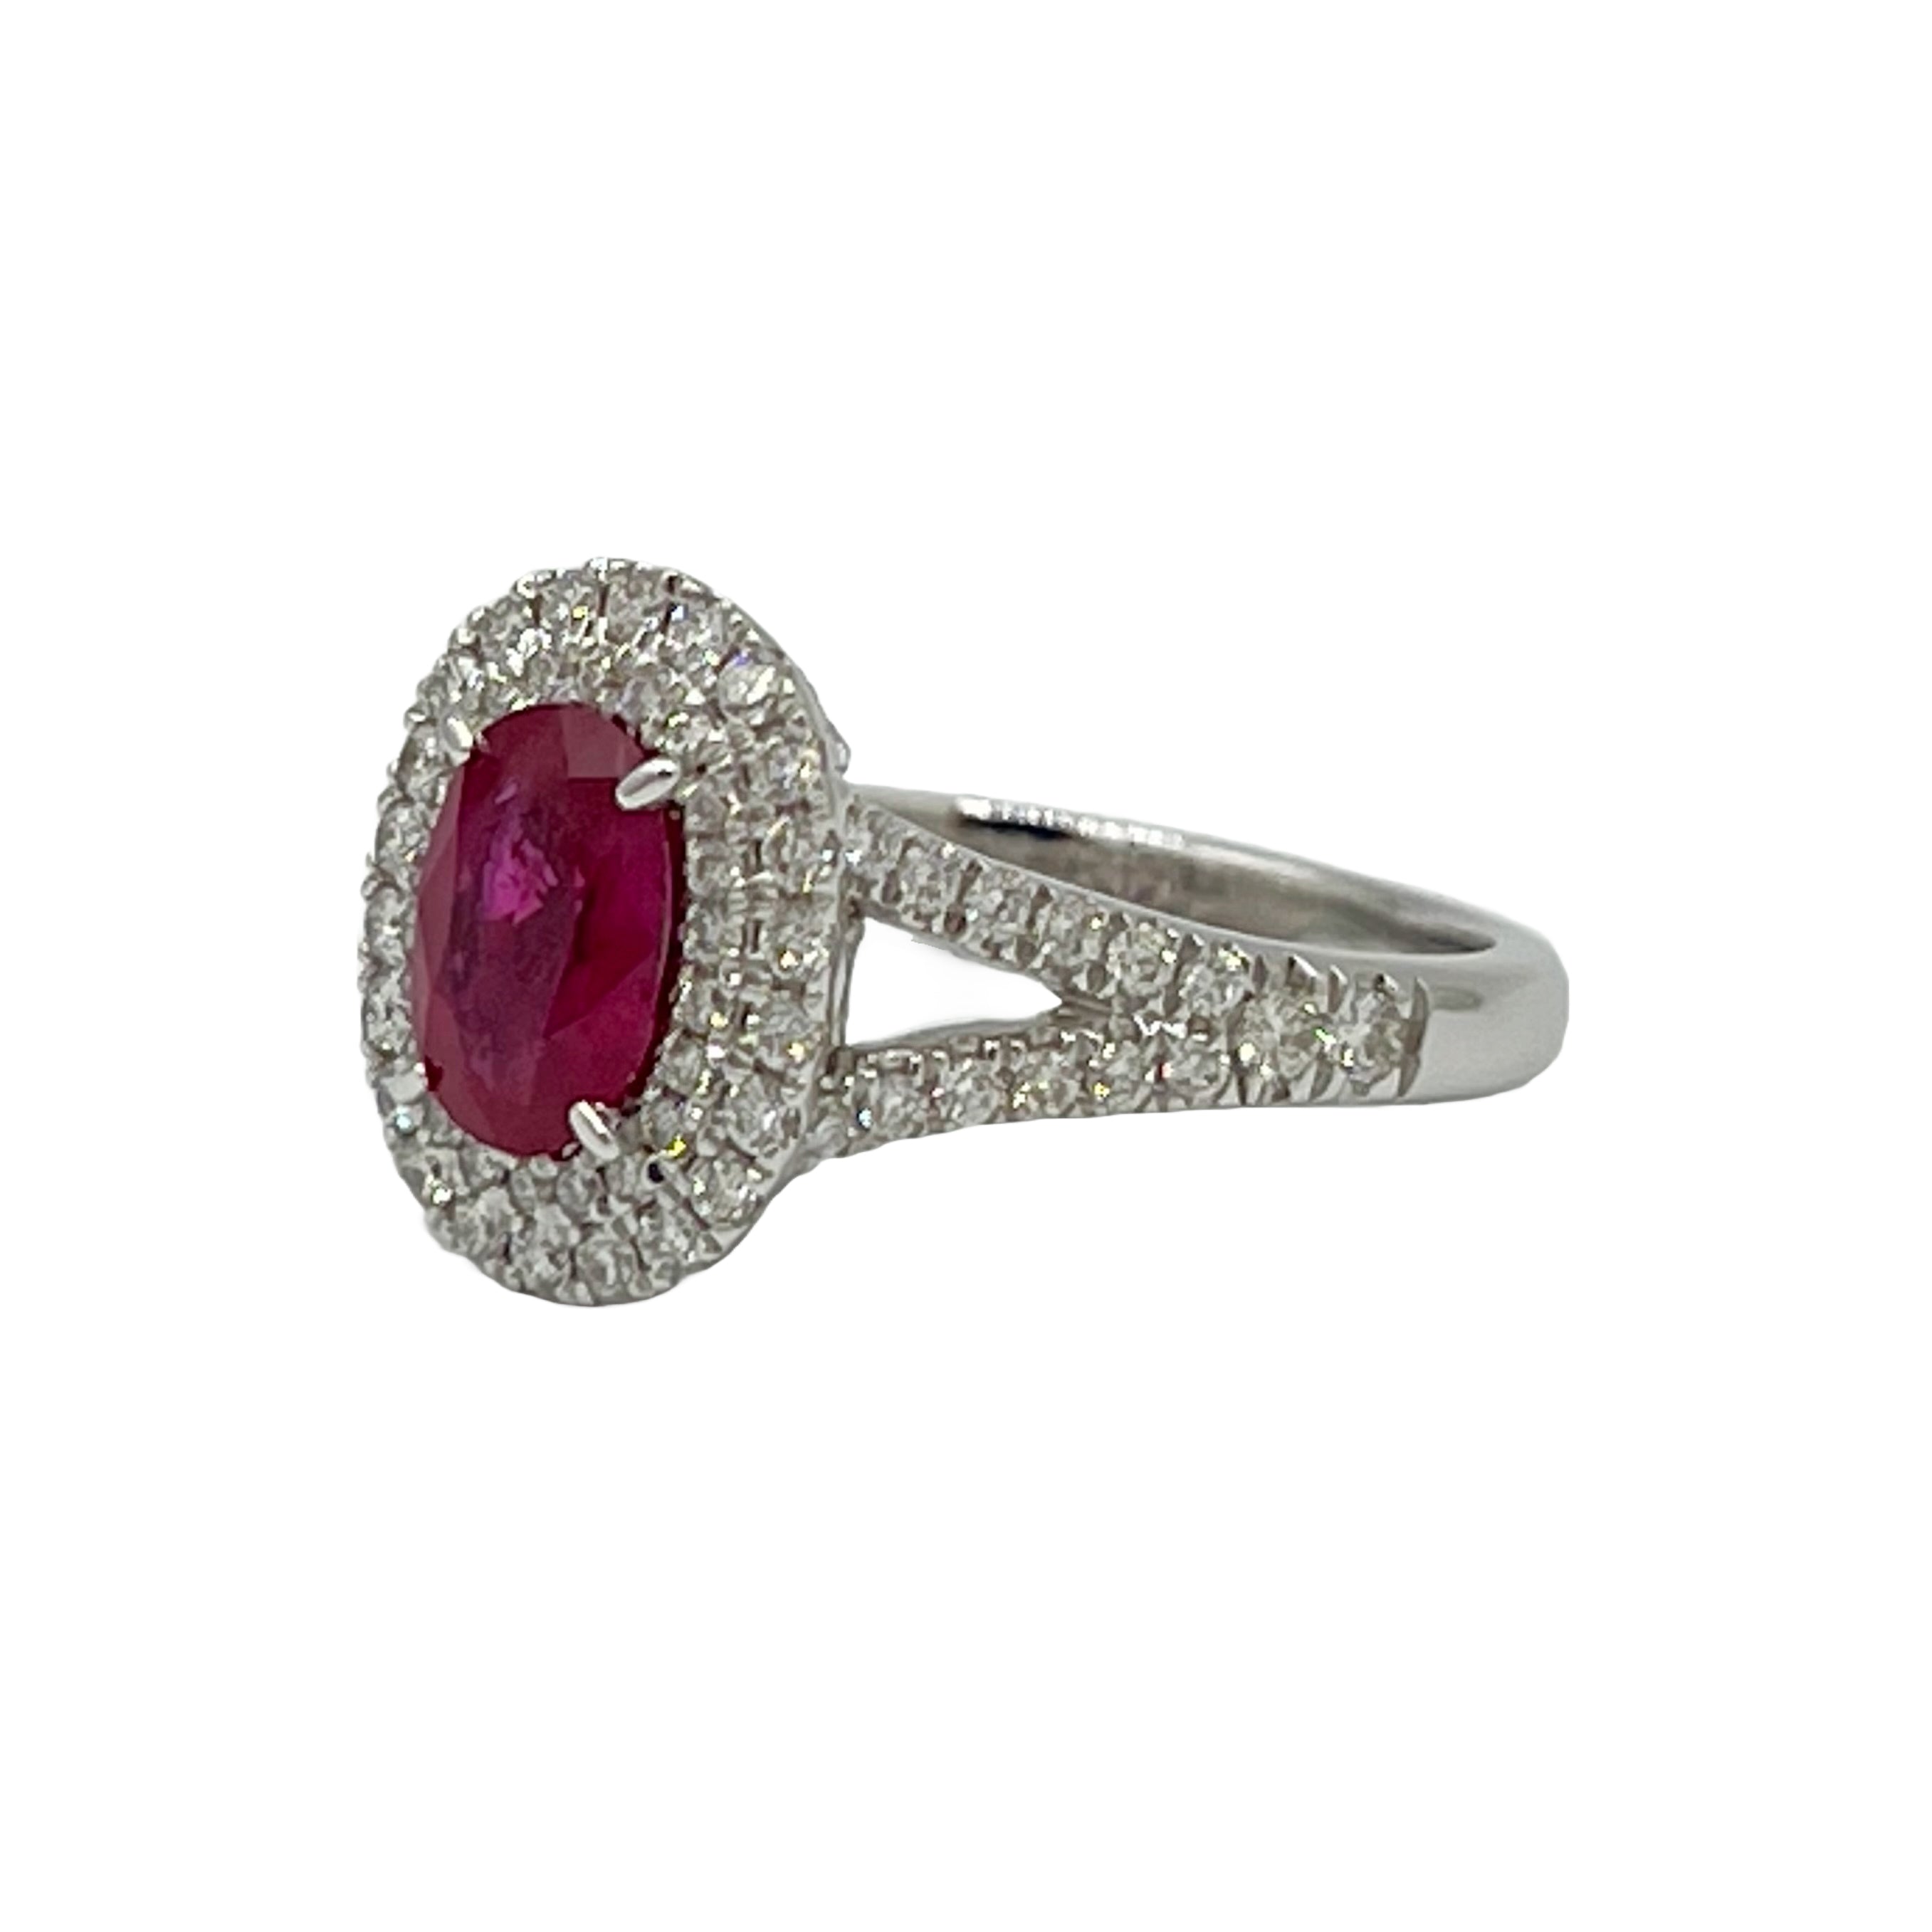 Ring 18KW/4.1G 1RUBY-1.14CT 72RD-0.58CT